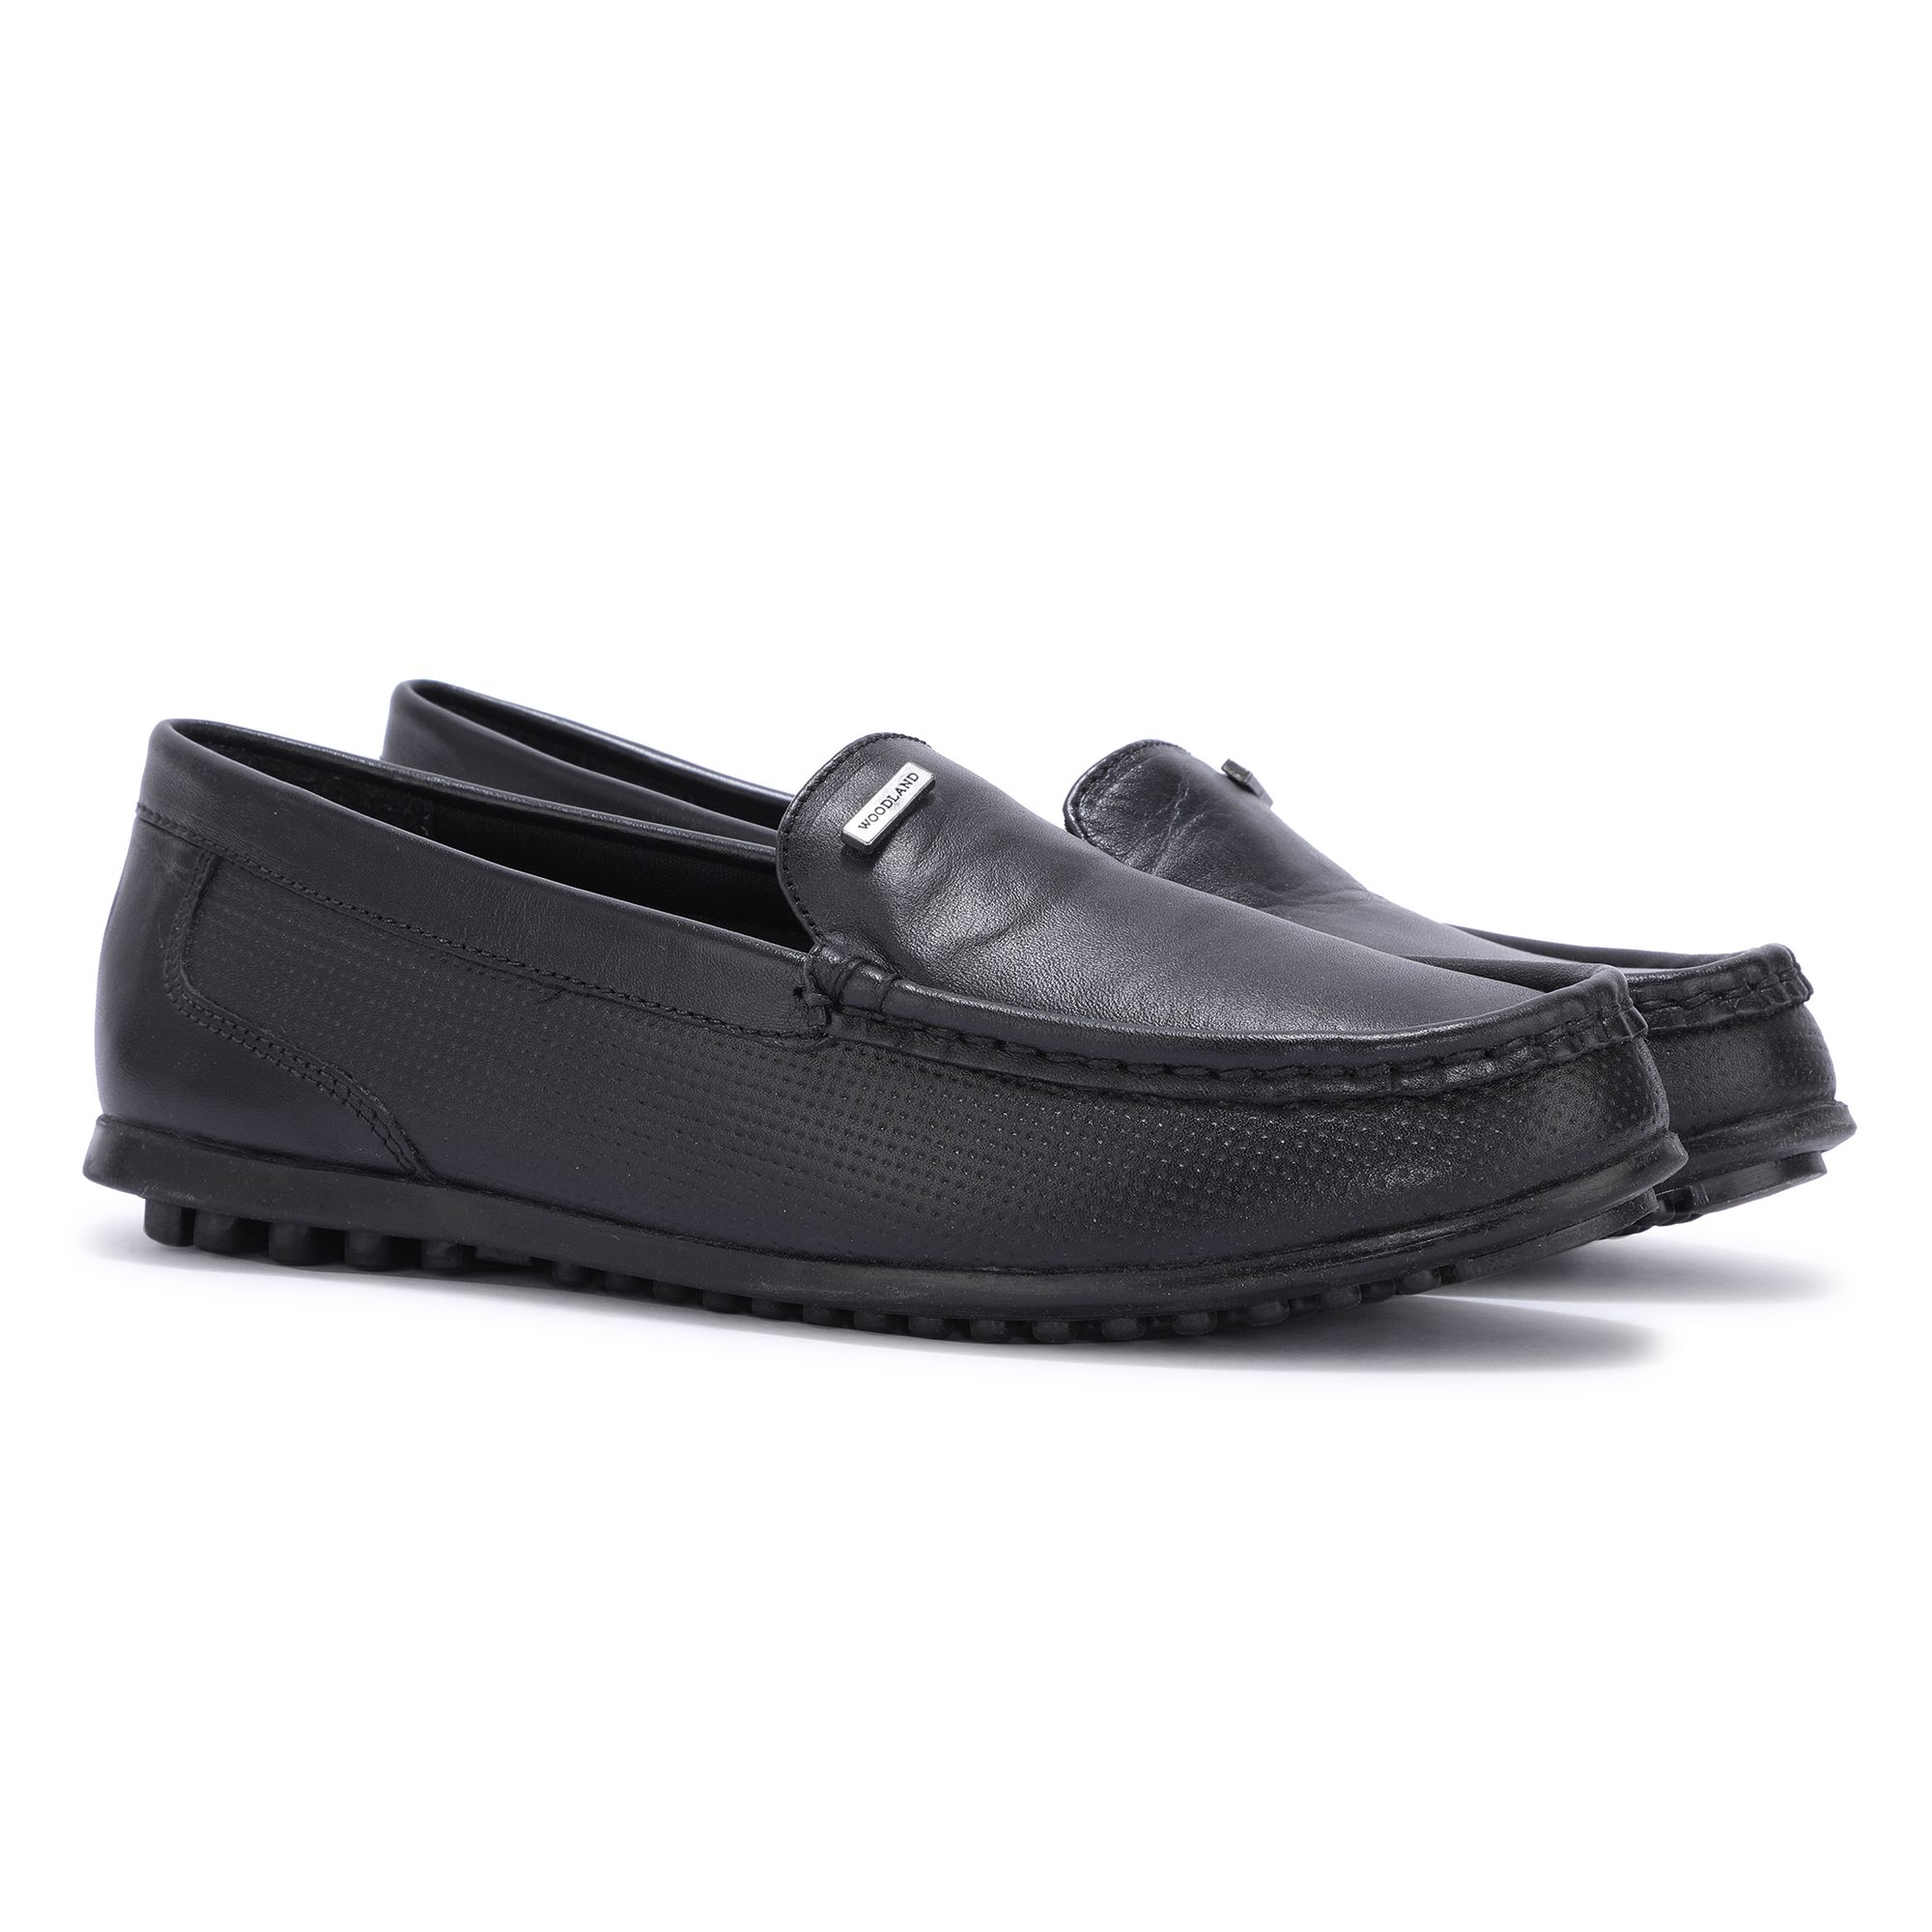 Black loafers for women